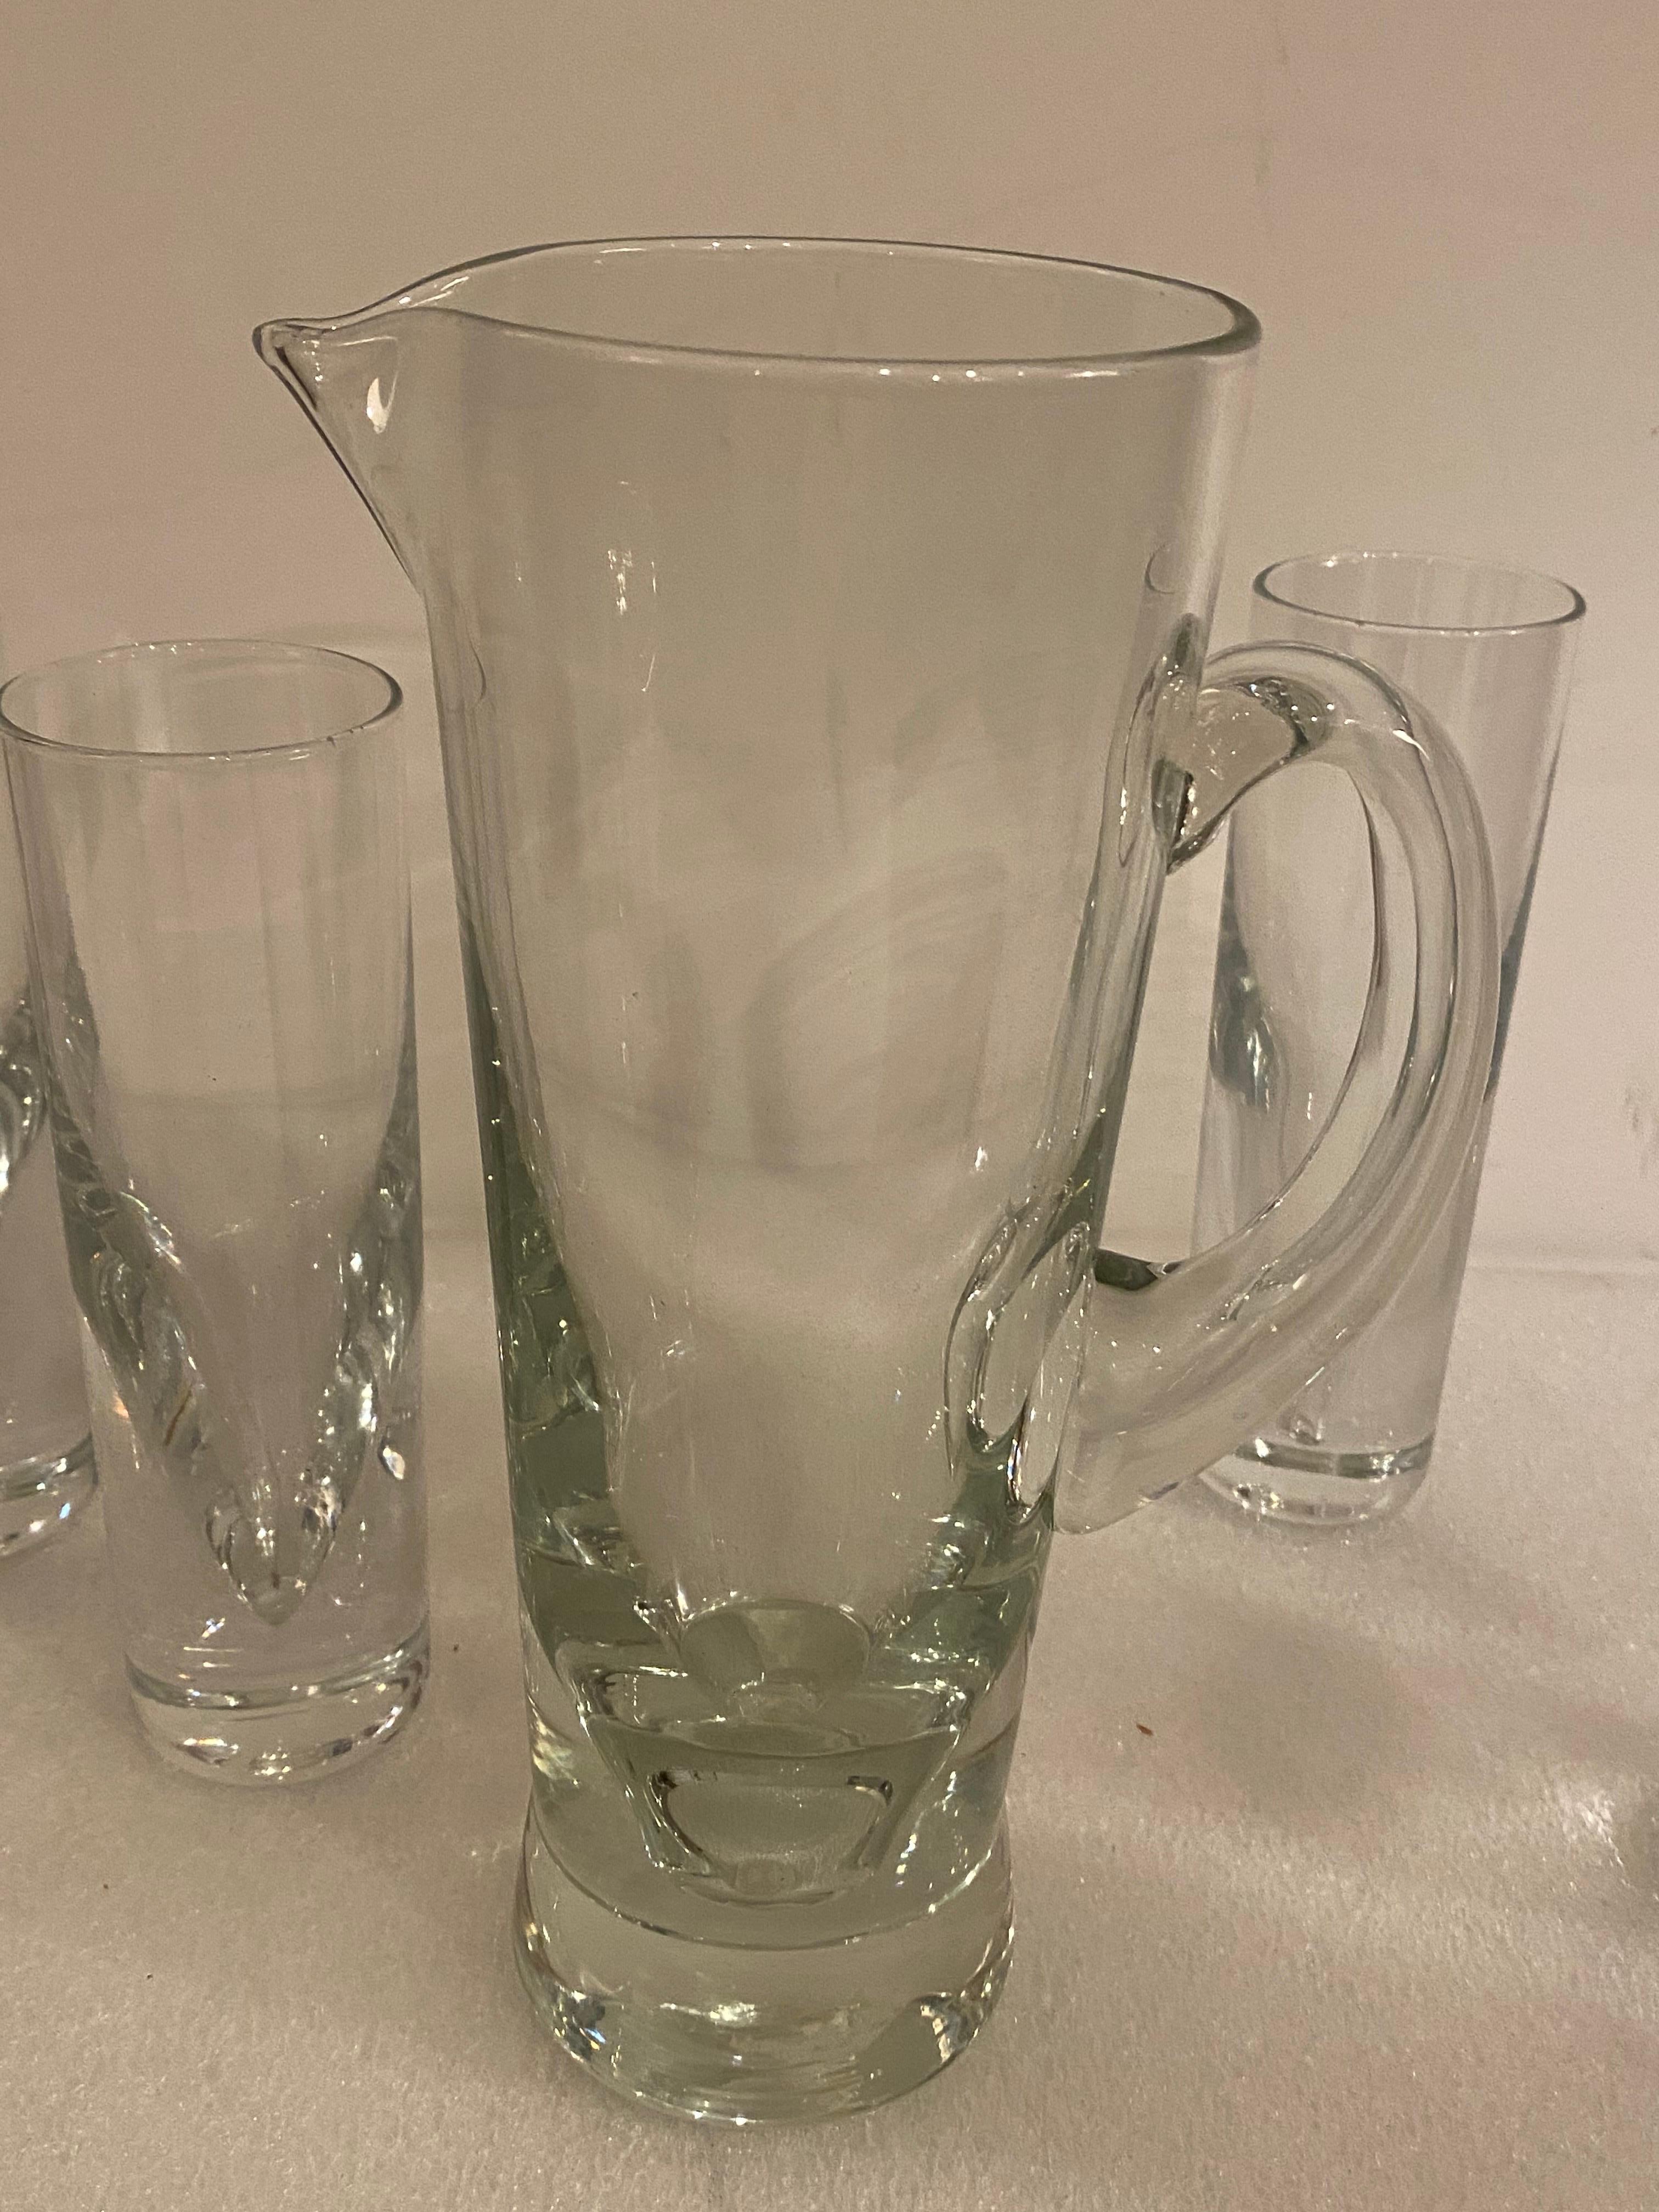 Carlo Moretti 7 Piece Bullet Glass Drink Set.  Nice complete set in great shape, probably unused!  Great heavy weighted glass and pitcher.